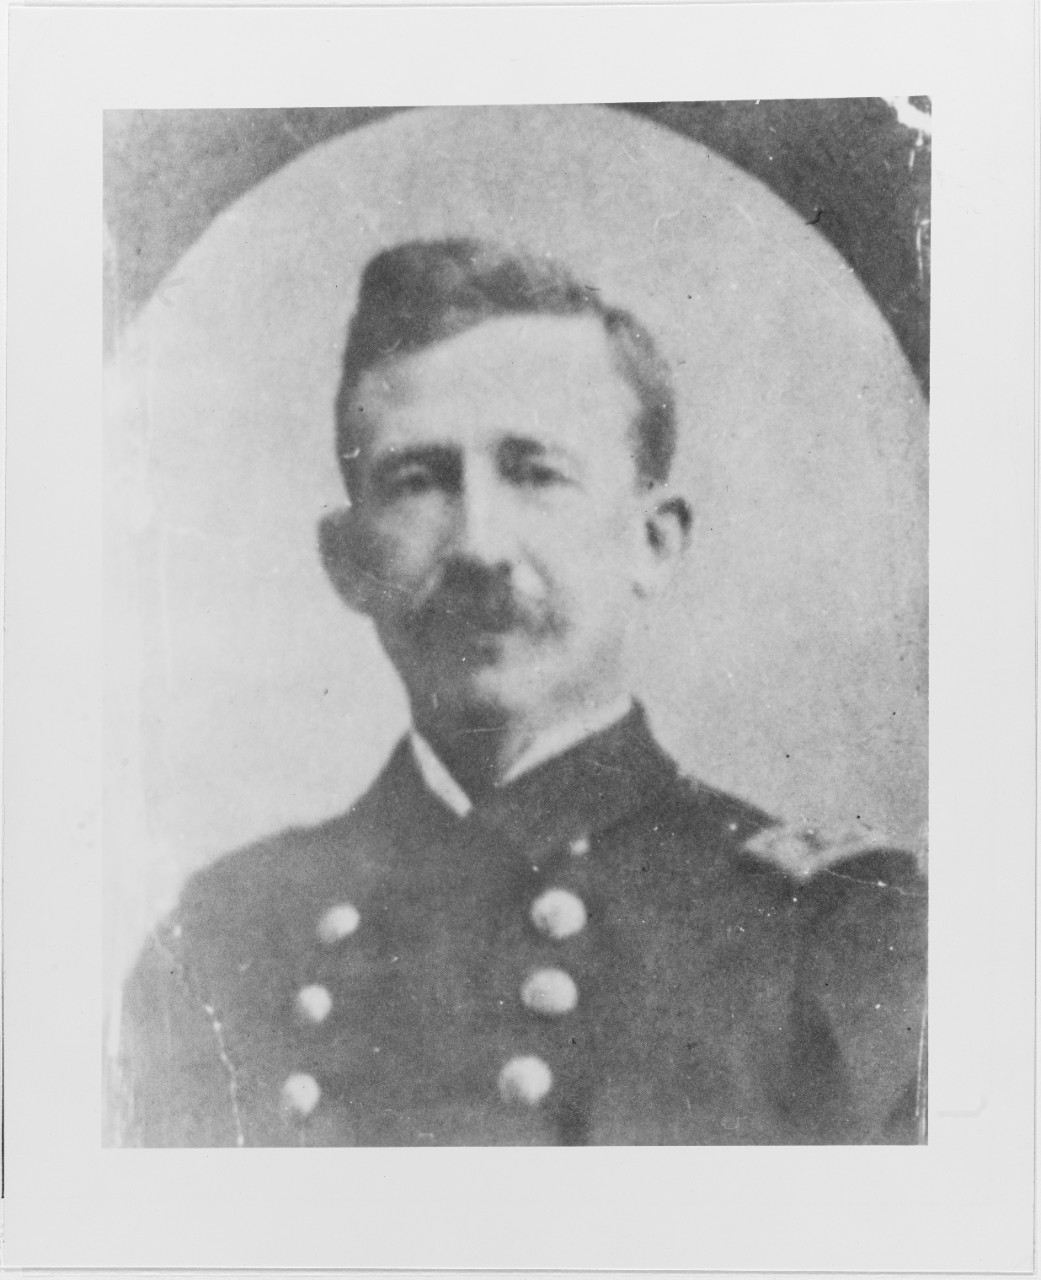 Commander William A. Sewell, USN